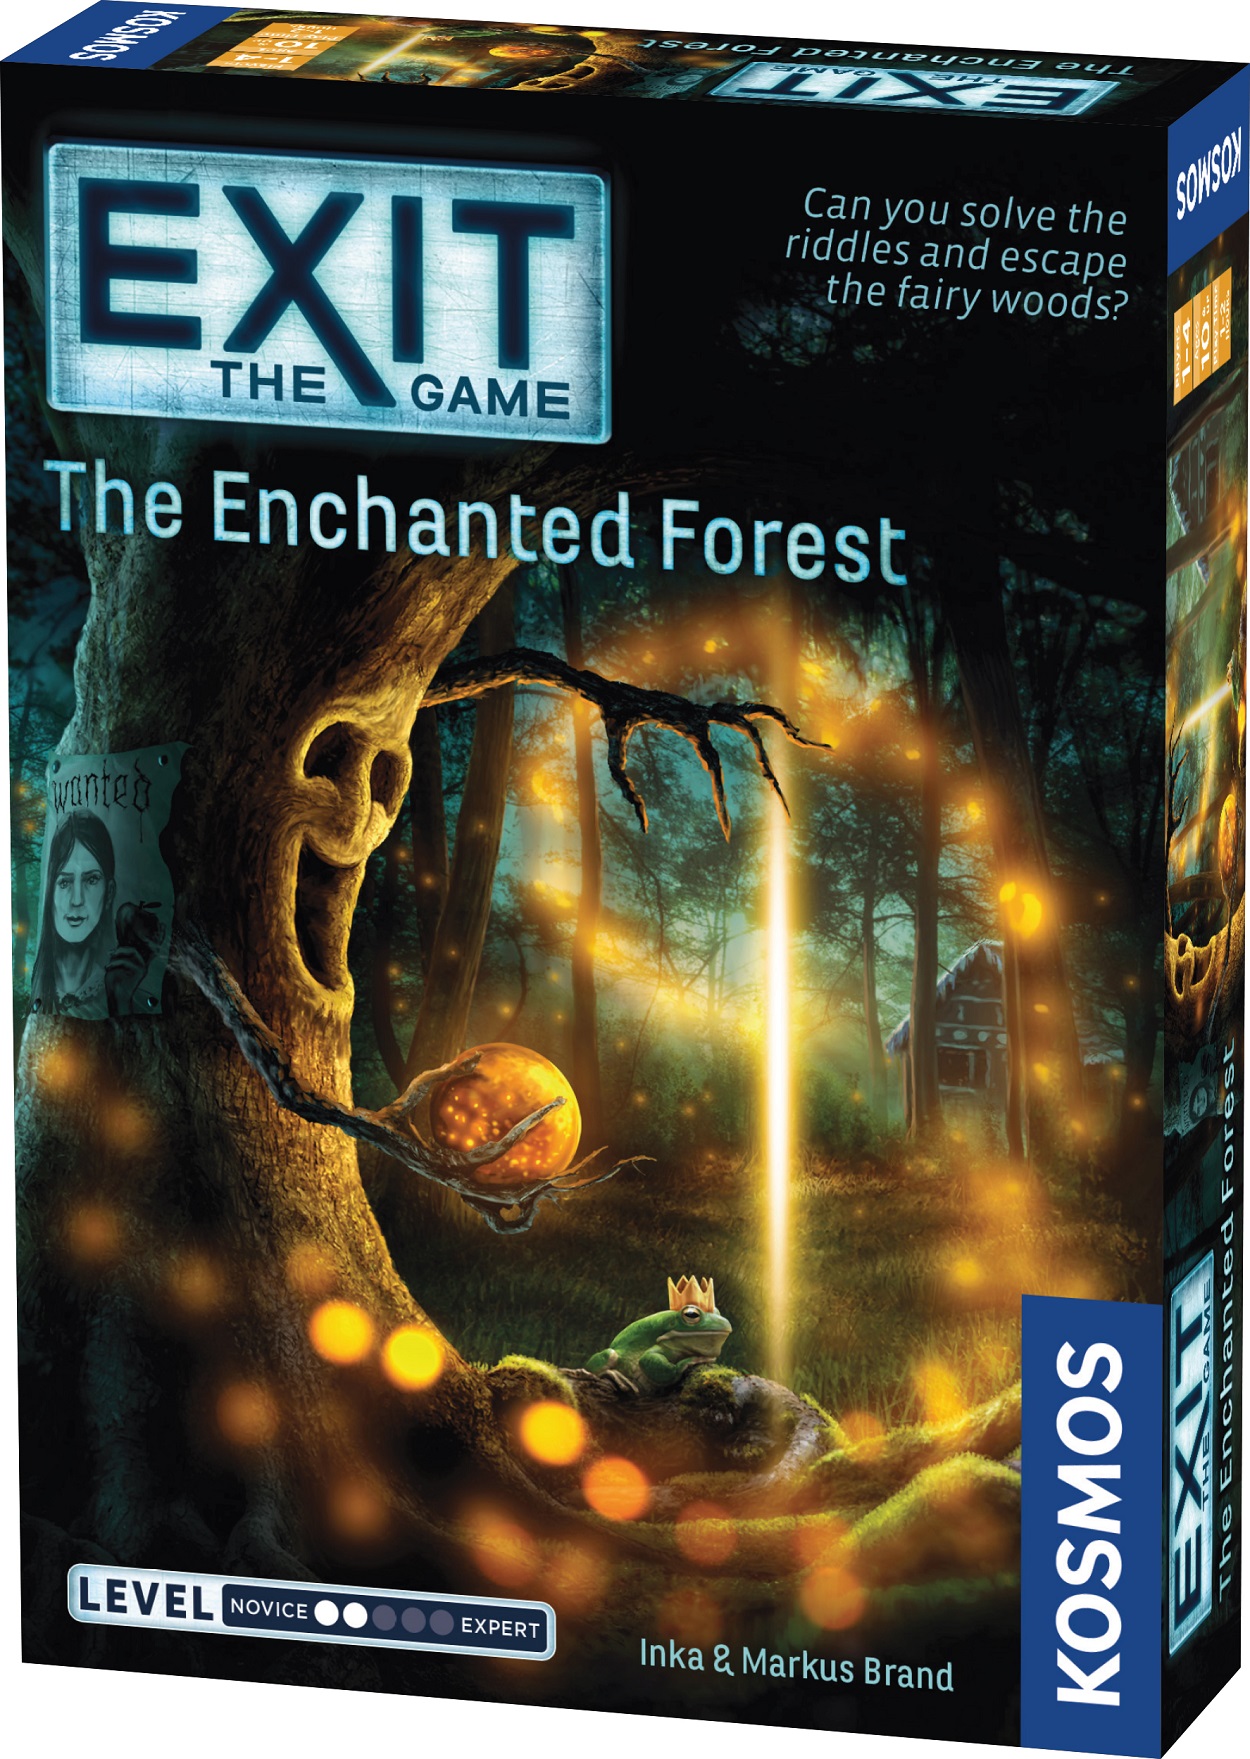 Exit: The Game - The Enchanted Forest